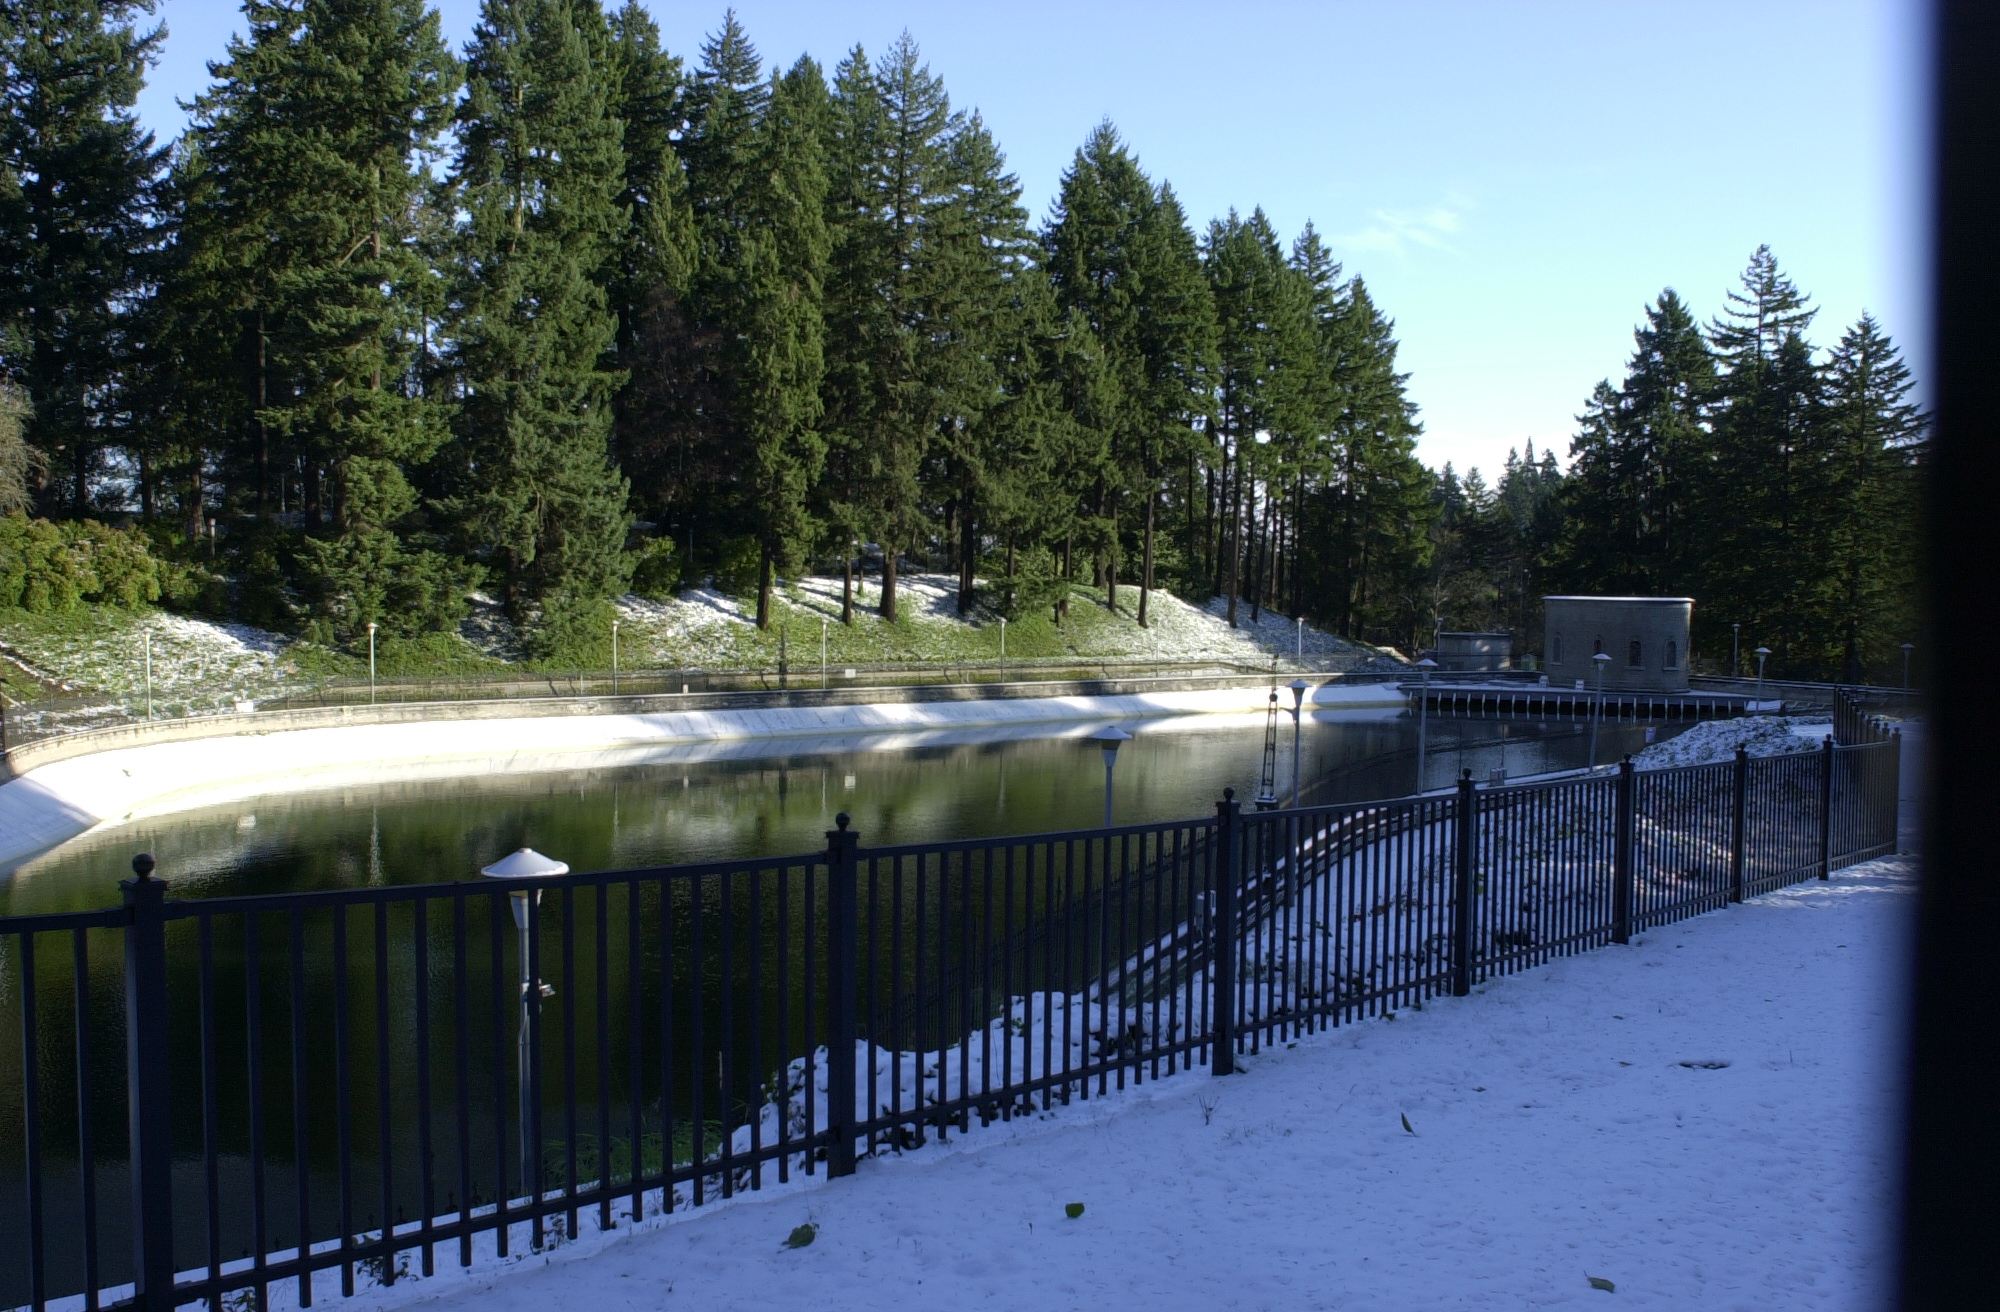 Washington Park Reservoir no. 4, December, 2008.  View to the south.